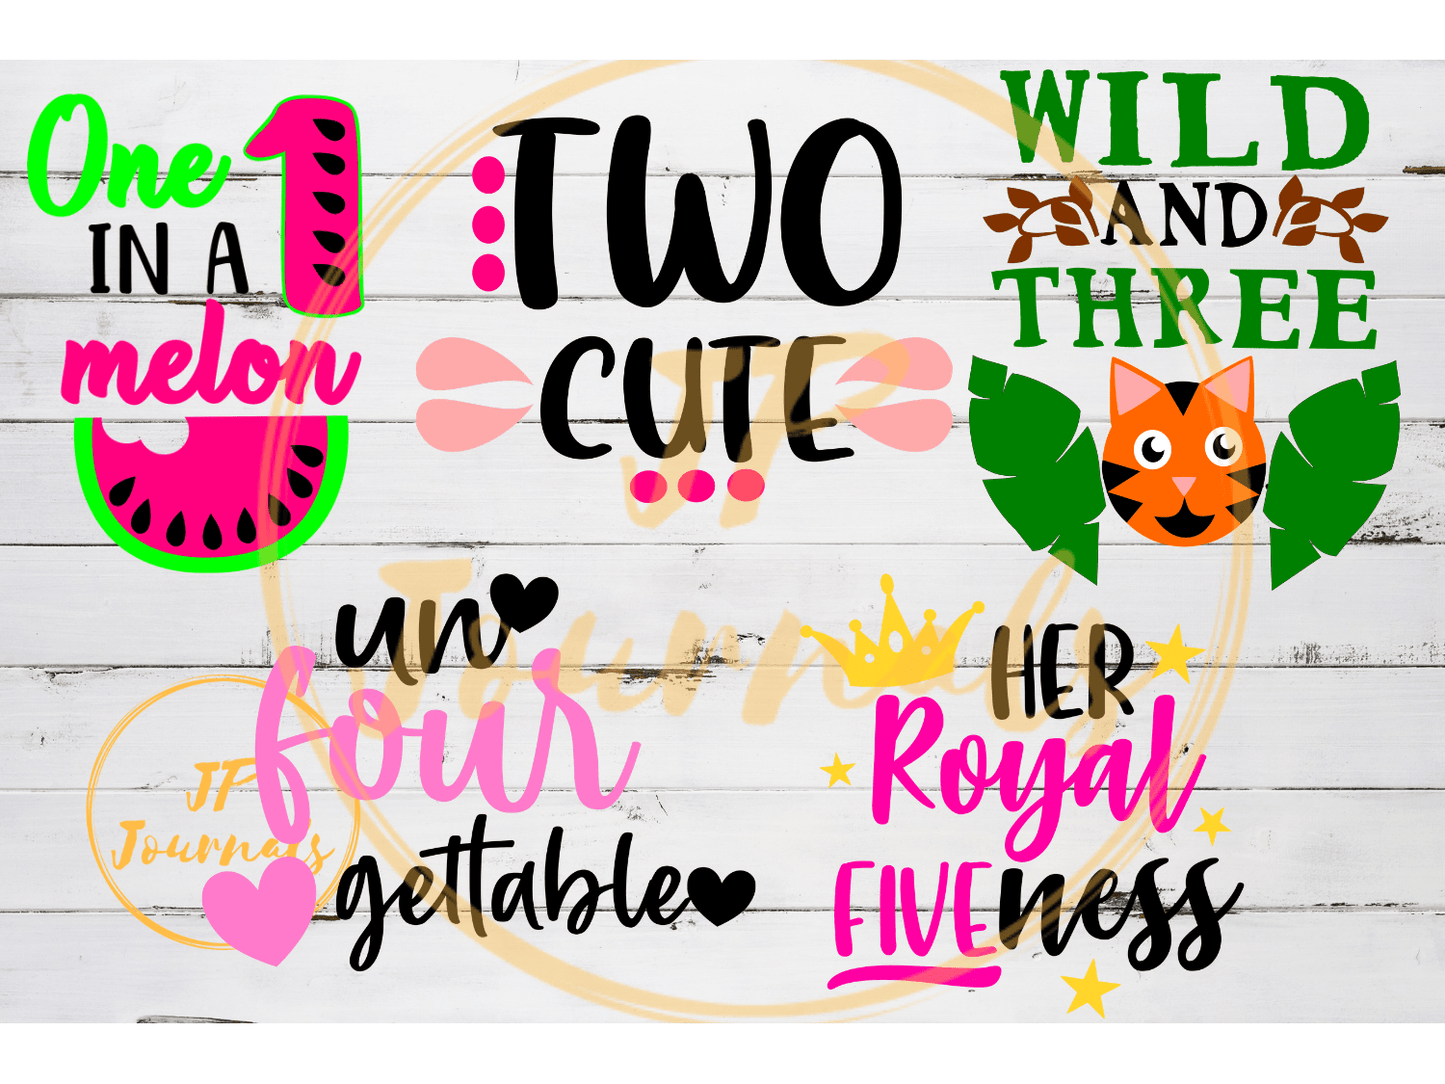 One in a Melon SVG, Two Cute SVG, Wild and Three SVG, Un Four Gettable SVG, Her Royal Fiveness SVG